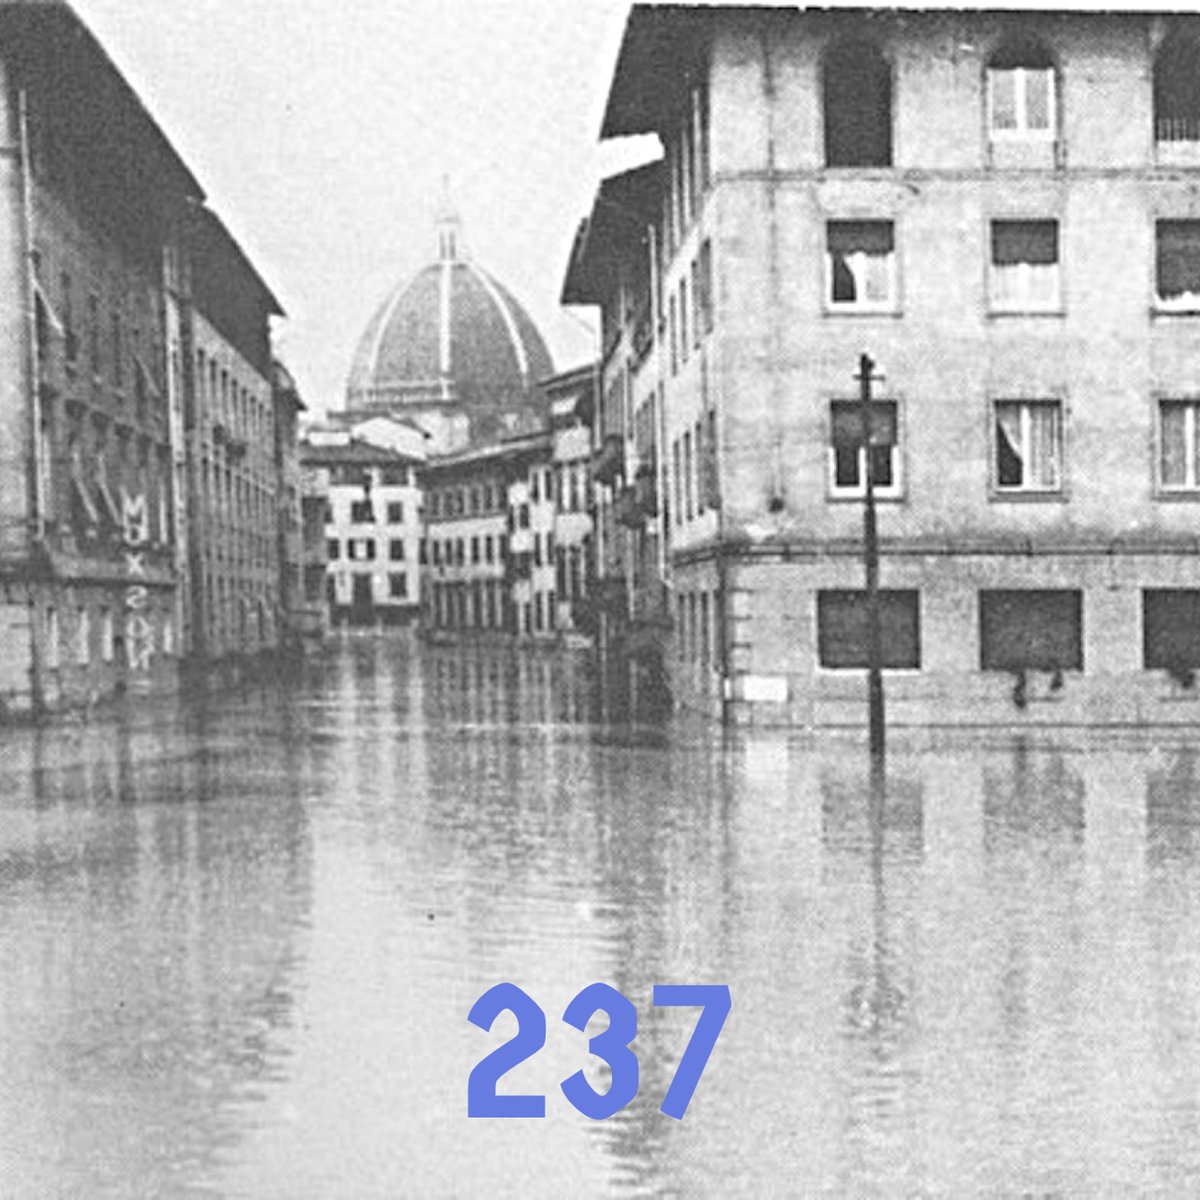 On November 3, 1333, the River Arno in Florence broke its banks and caused massive flood damage. Today also marks 237 days since Cllr Sarah Warren said she wanted a healthy debate on how we get around in Bath. We are hoping she will flood us with possible dates. #SaveBath